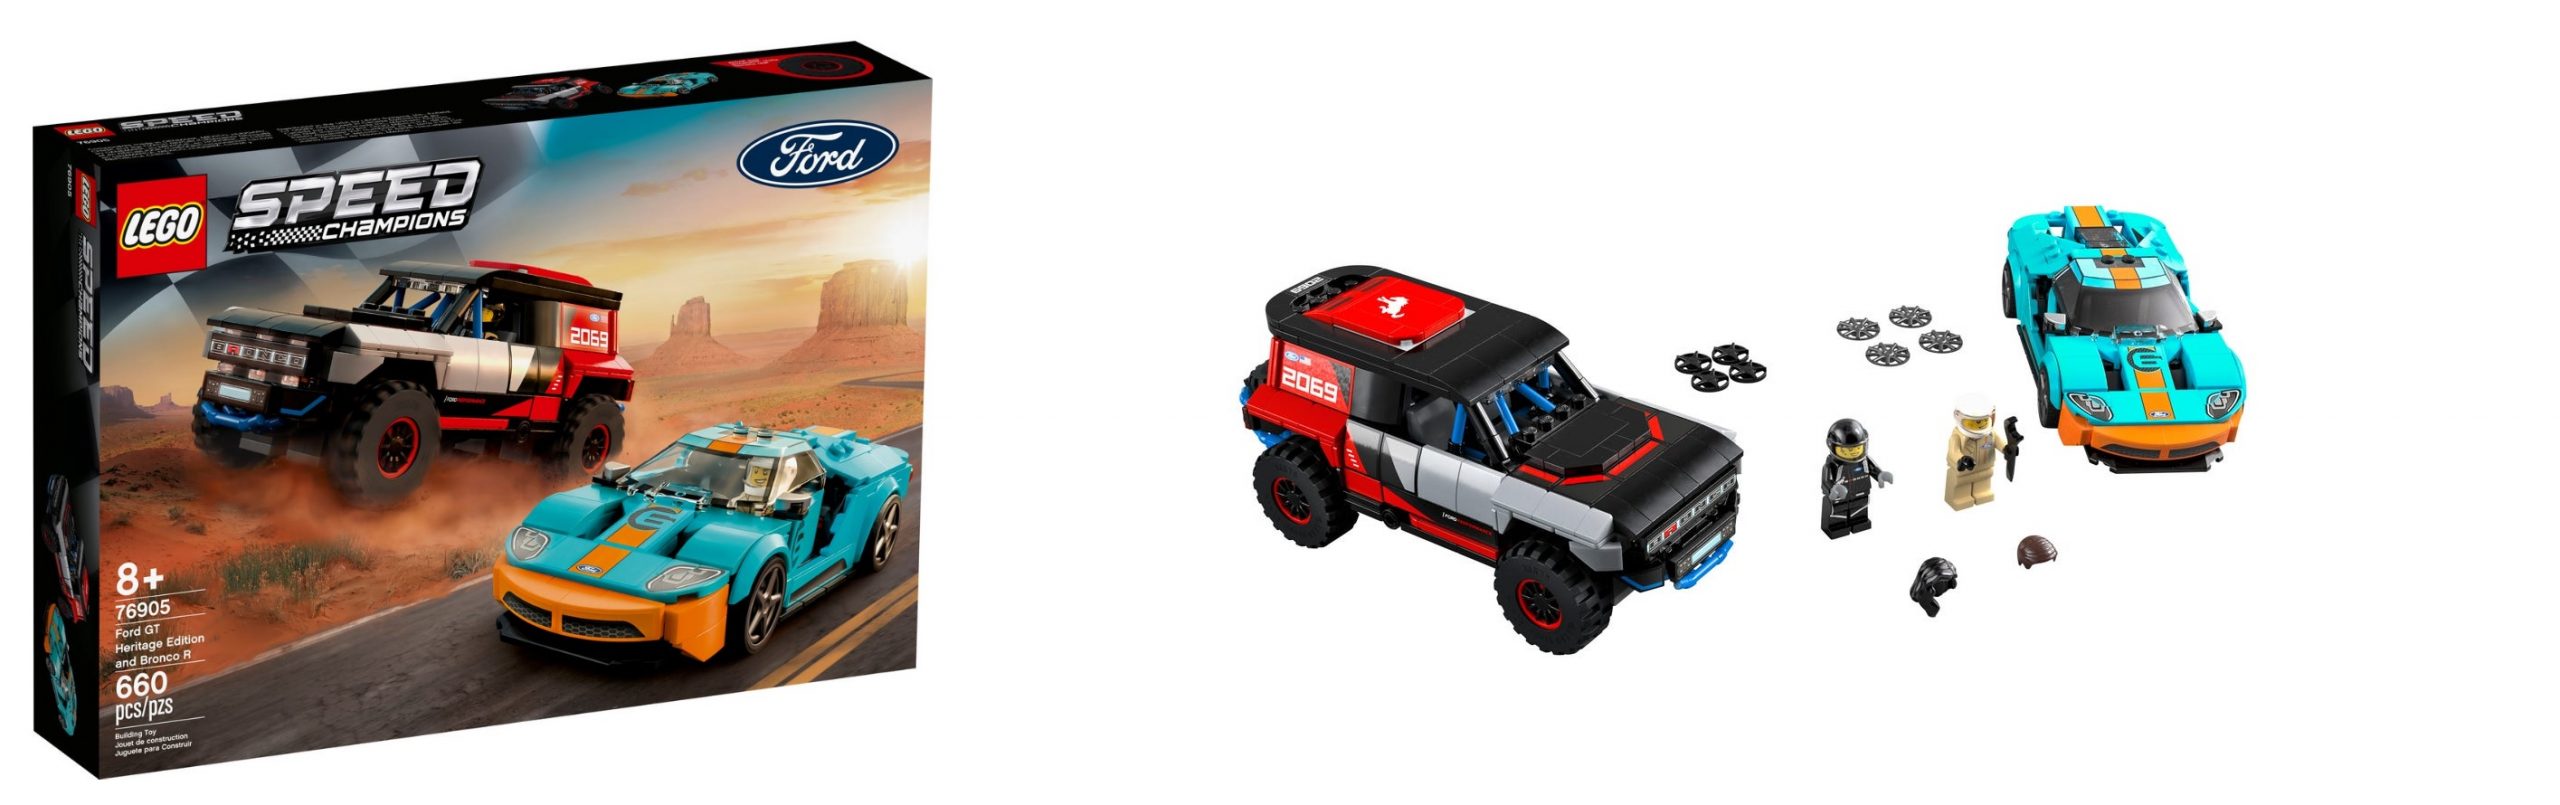 LEGO Speed Champions Summer 2021 Sets, Leaks, Images & Pricing (76900